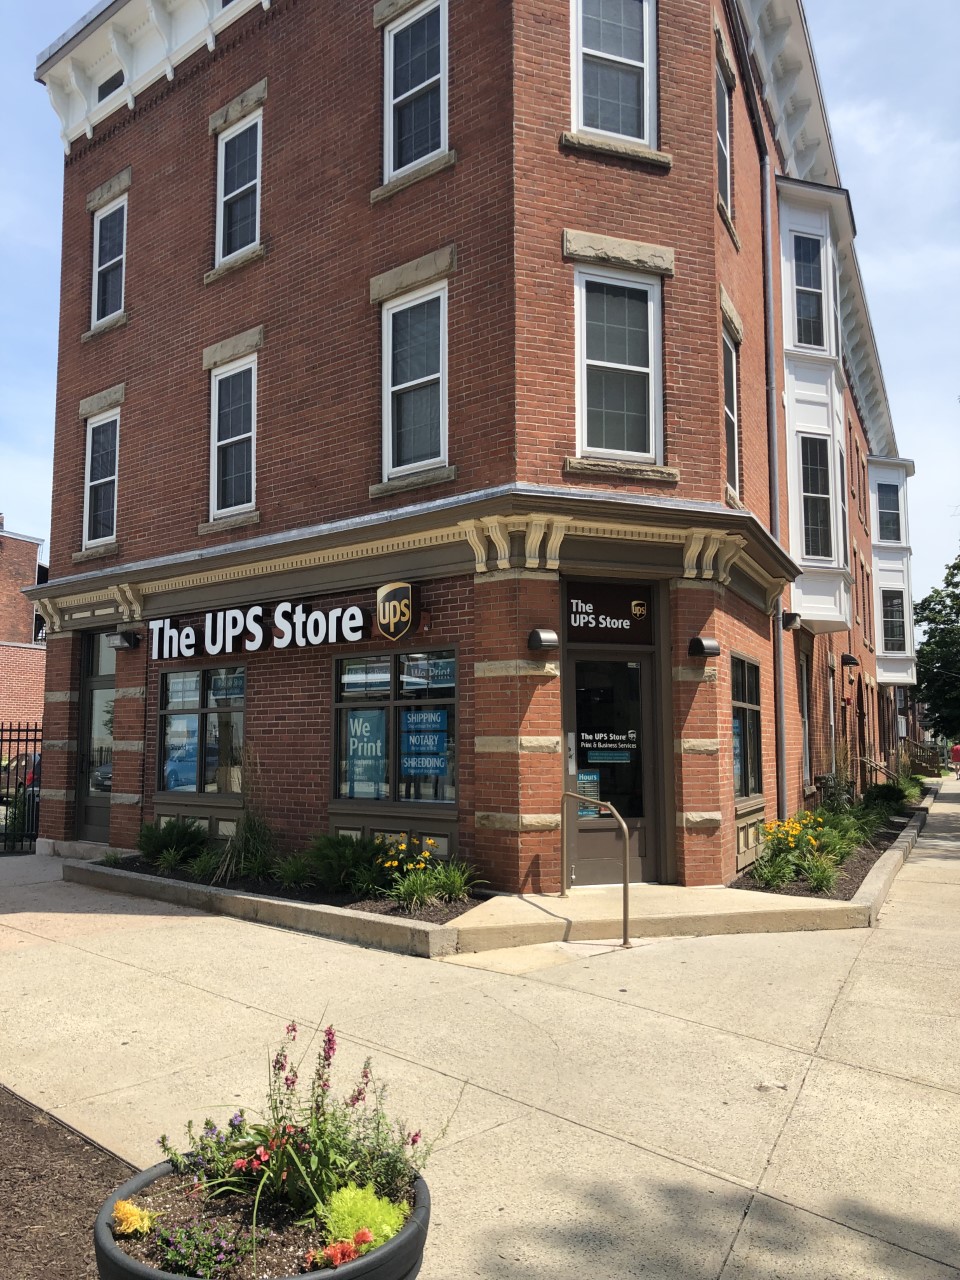 The UPS Store at Yale, located on Dixwell Avenue, adjcent to Payne Whitney Gym and Apple Store, offers Shipping, Packing, Local Pick-up, Mailbox Service, Printing, Shredding, Passport Photos, Freight Shipping